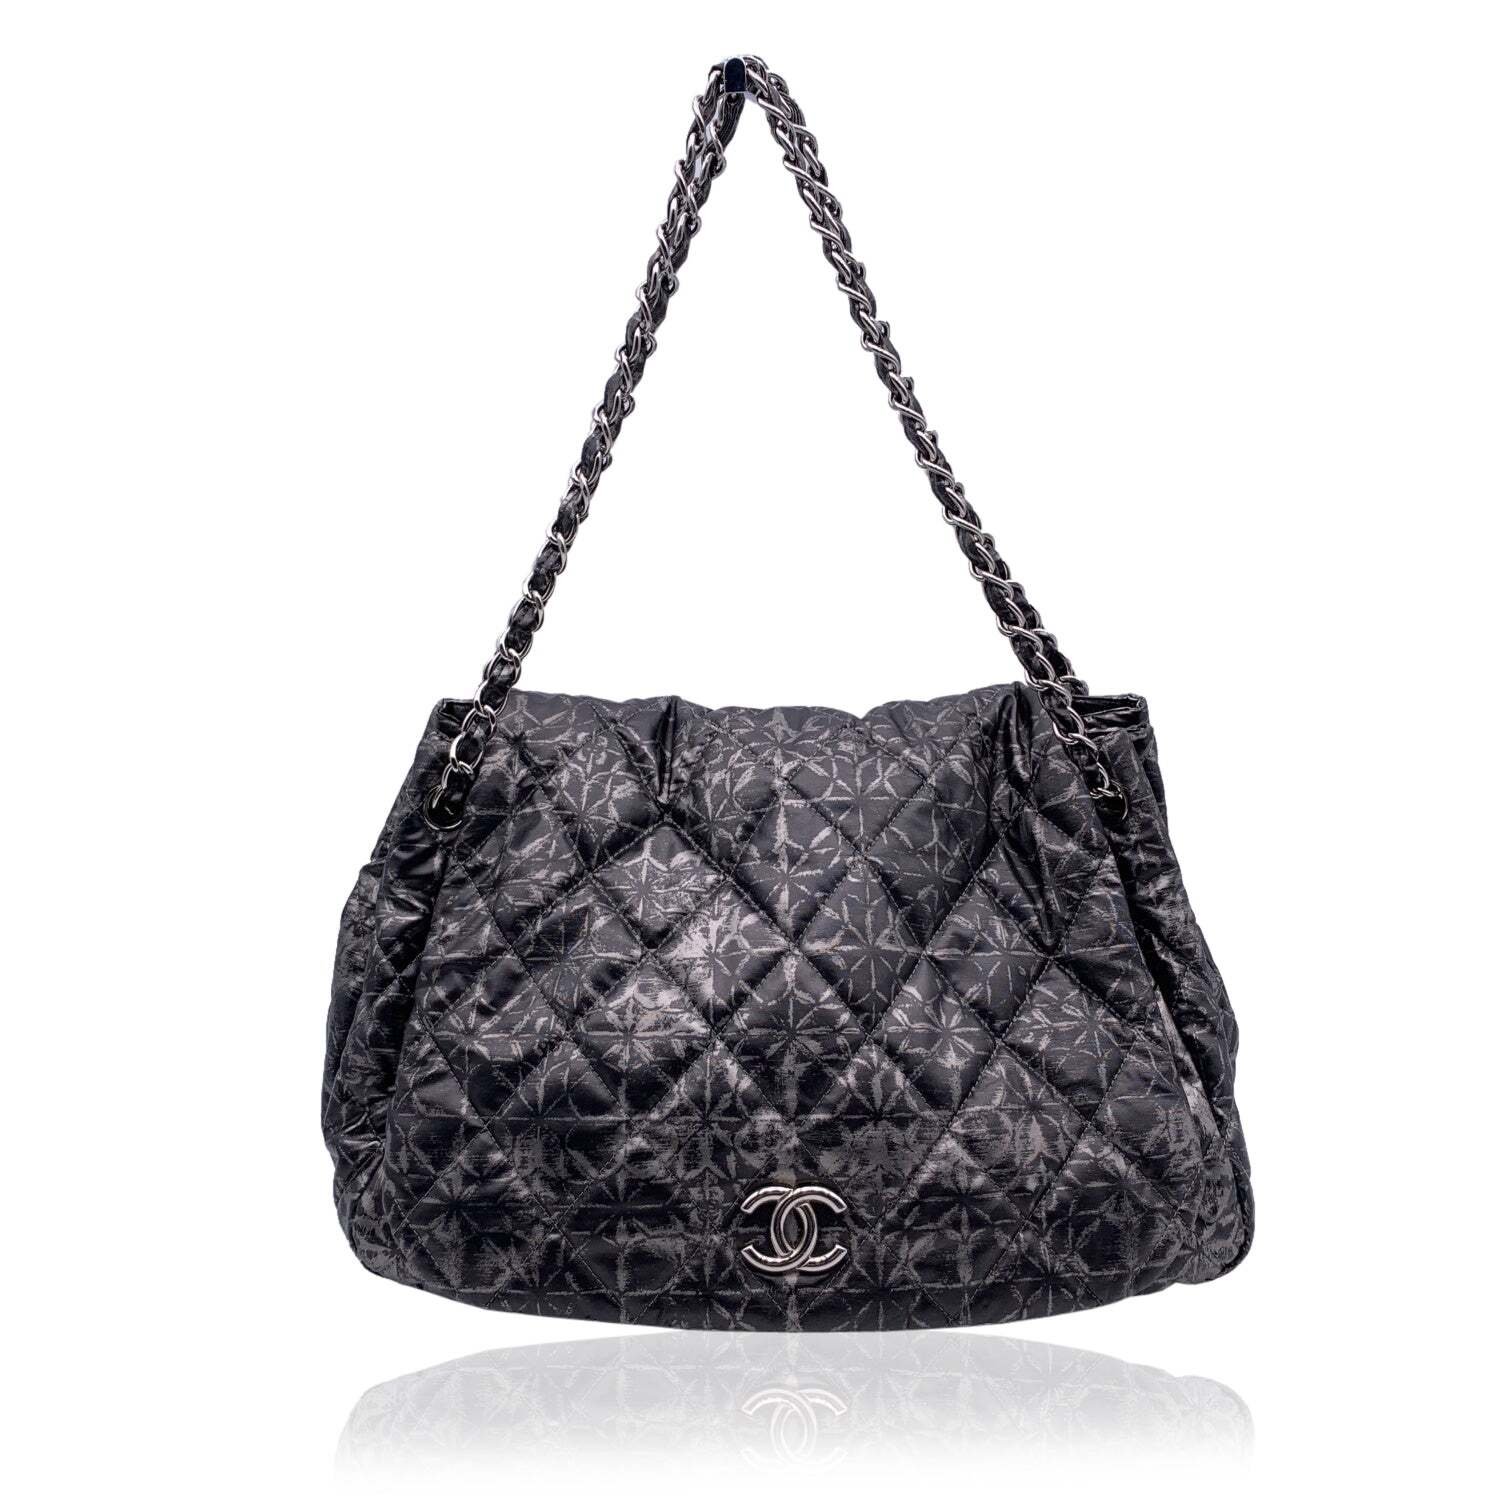 Chanel Limited Edition Flap Printed Nylon Quilted Shoulder/Crossbody Bag